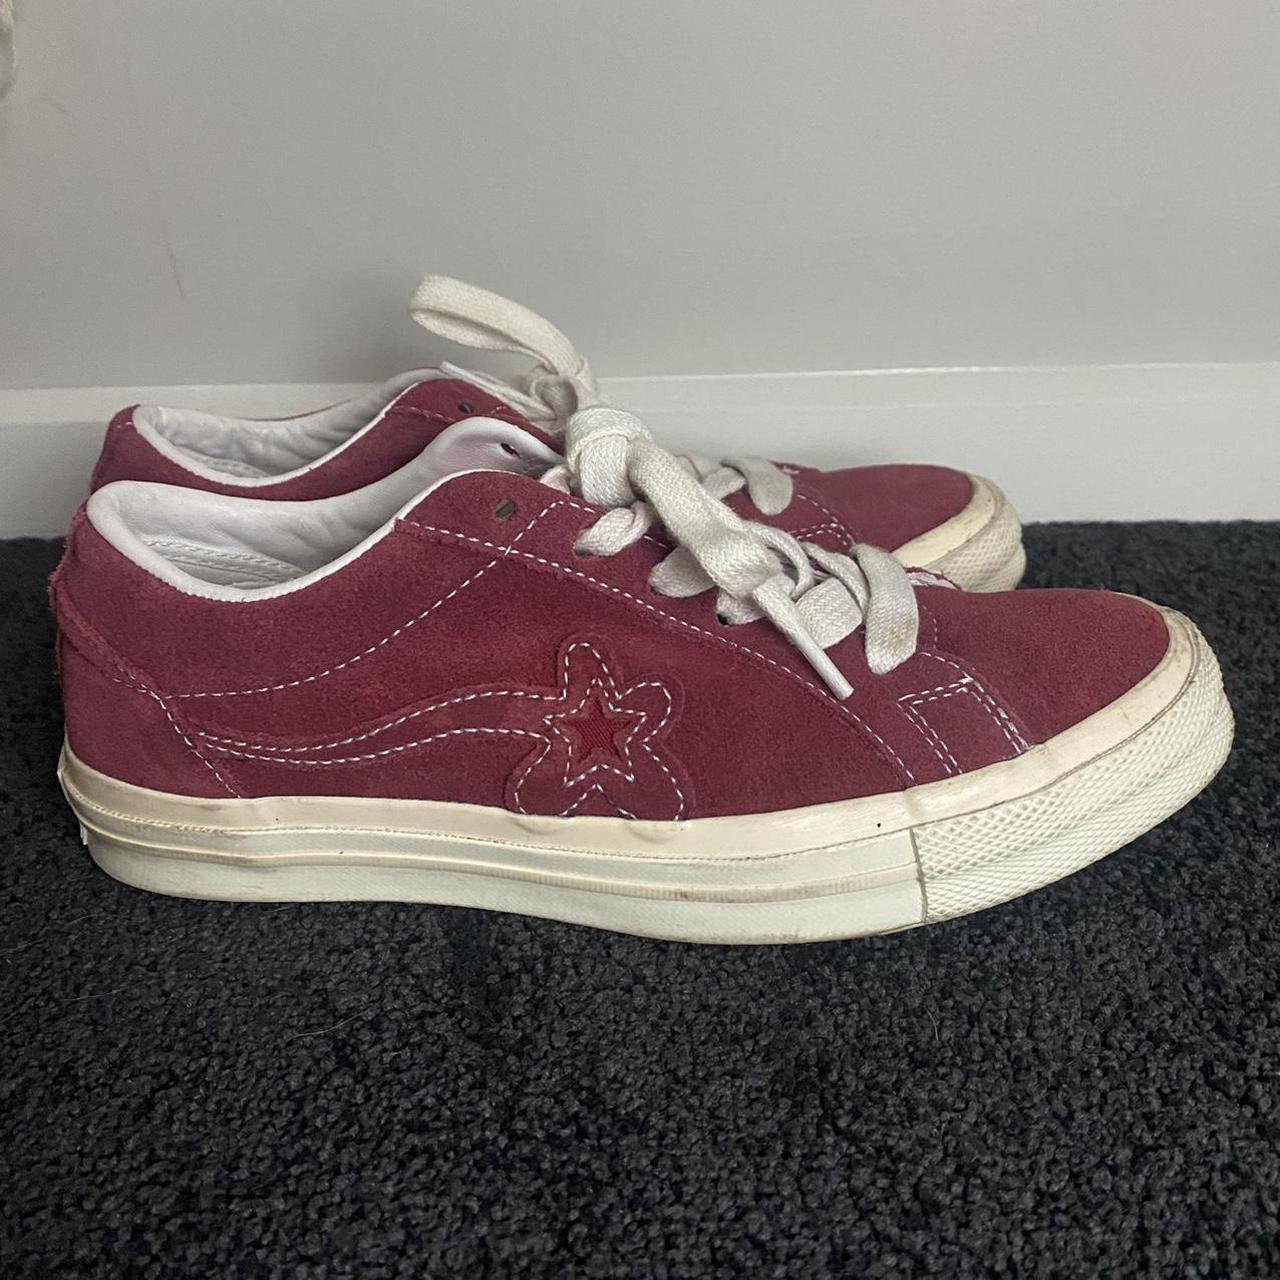 Tyler the Creator | GOLF le FLUER shoes In the... - Depop